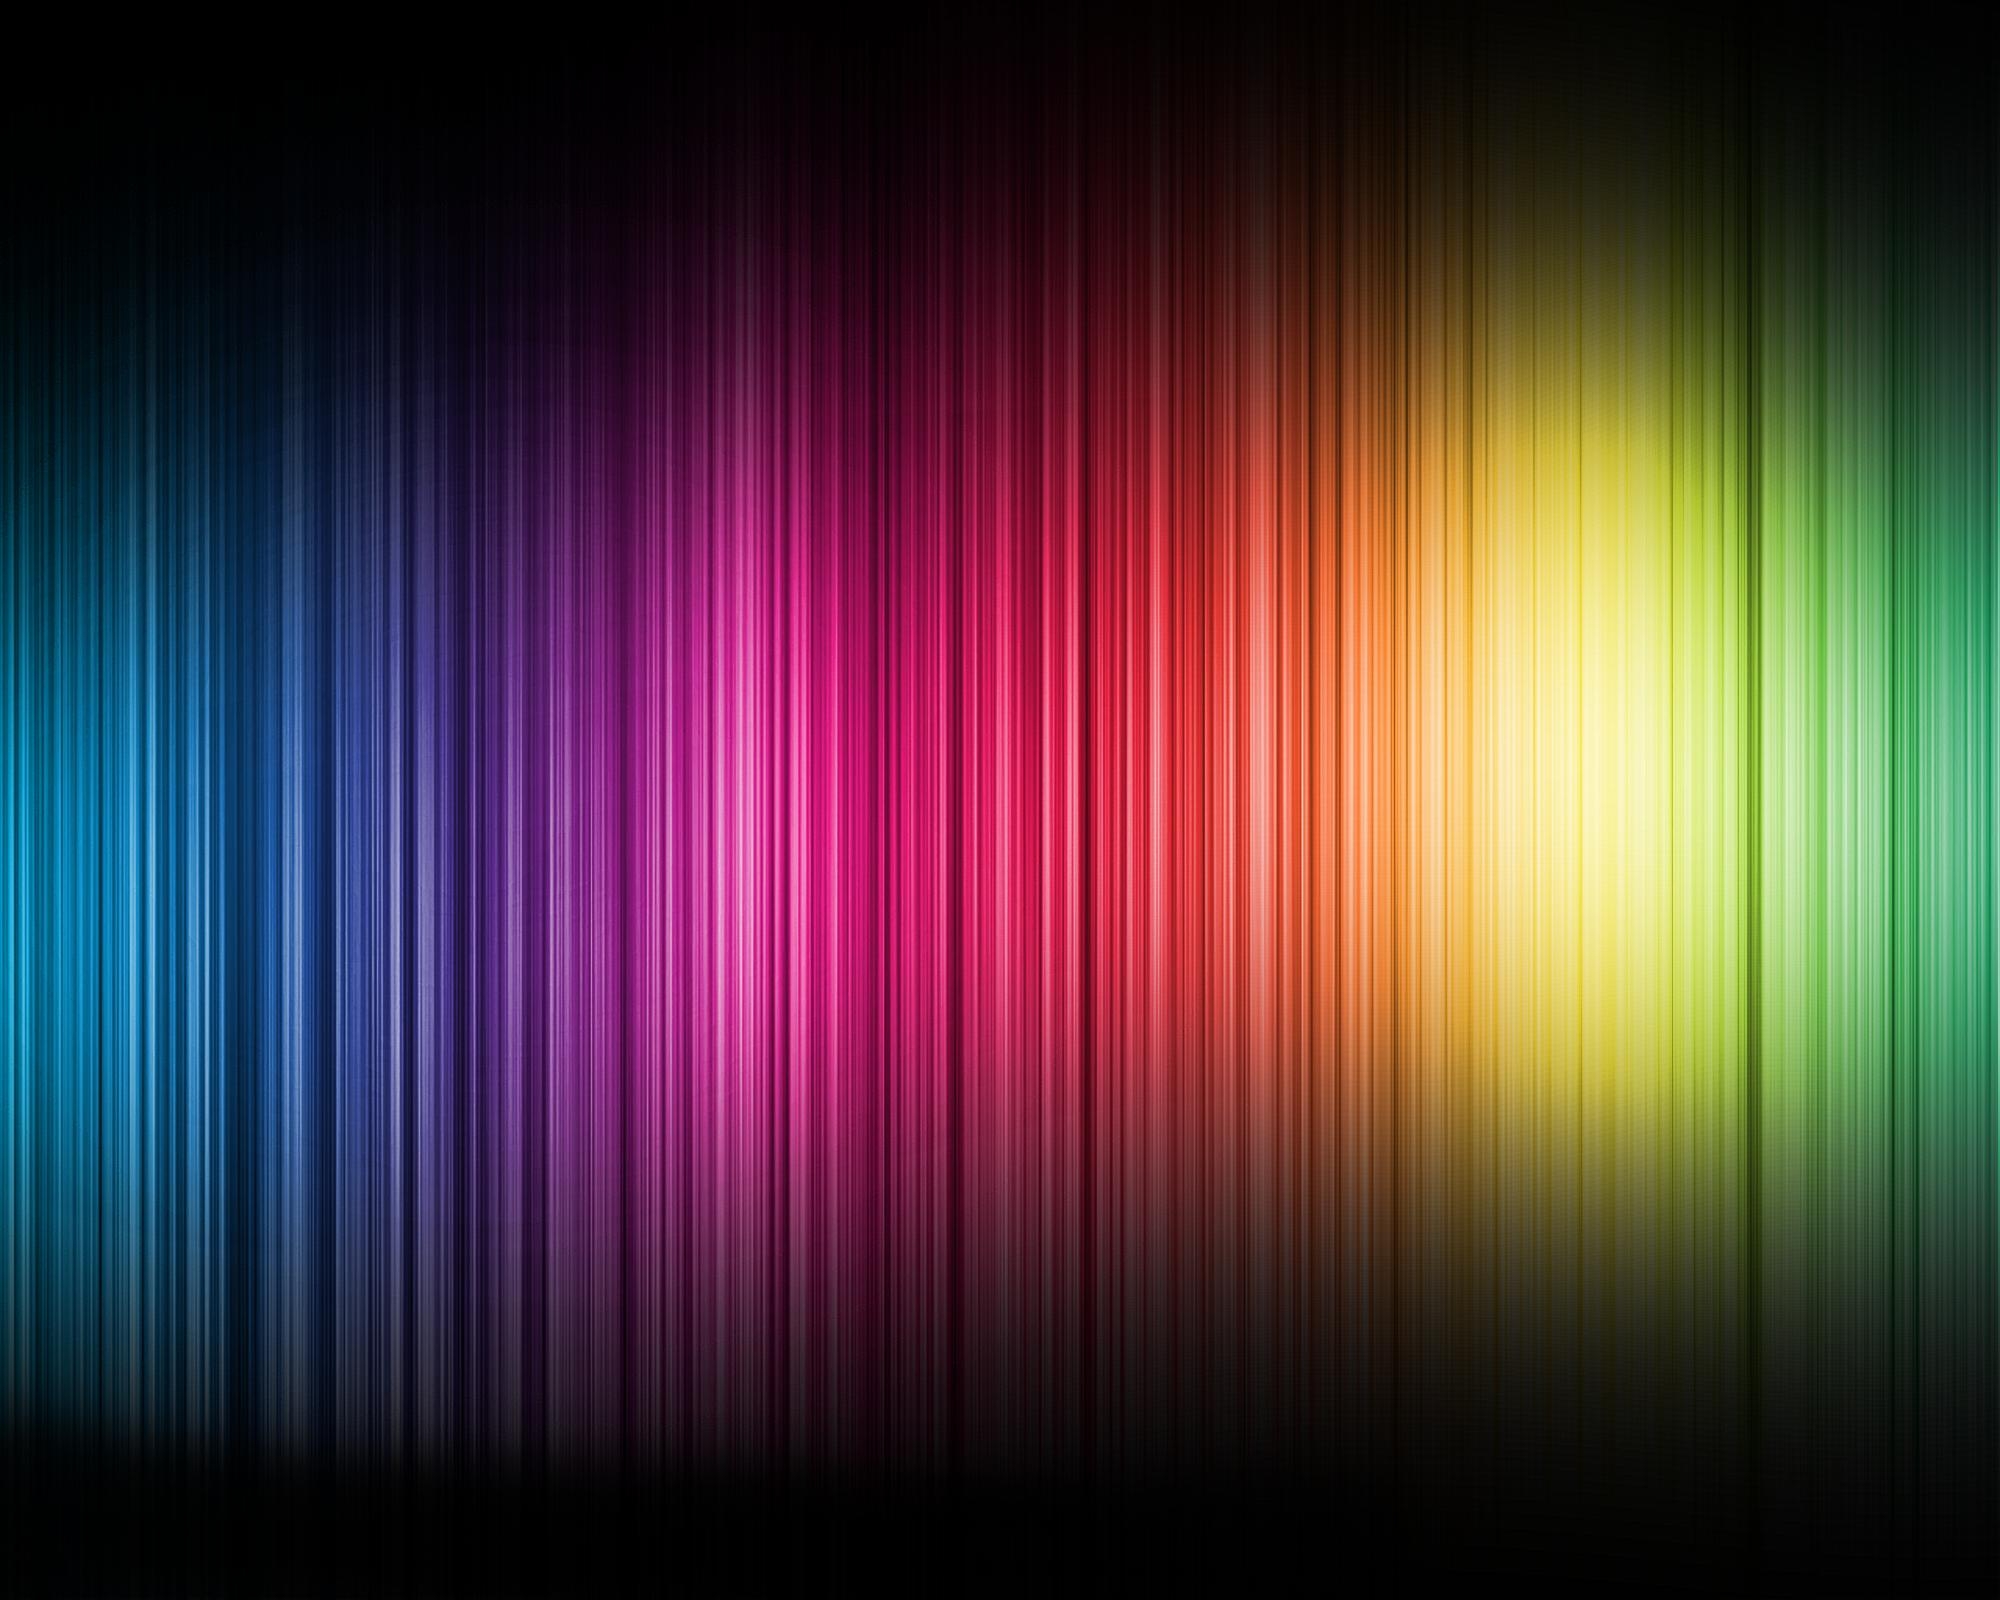 Popular Spectrum images for mobile phone